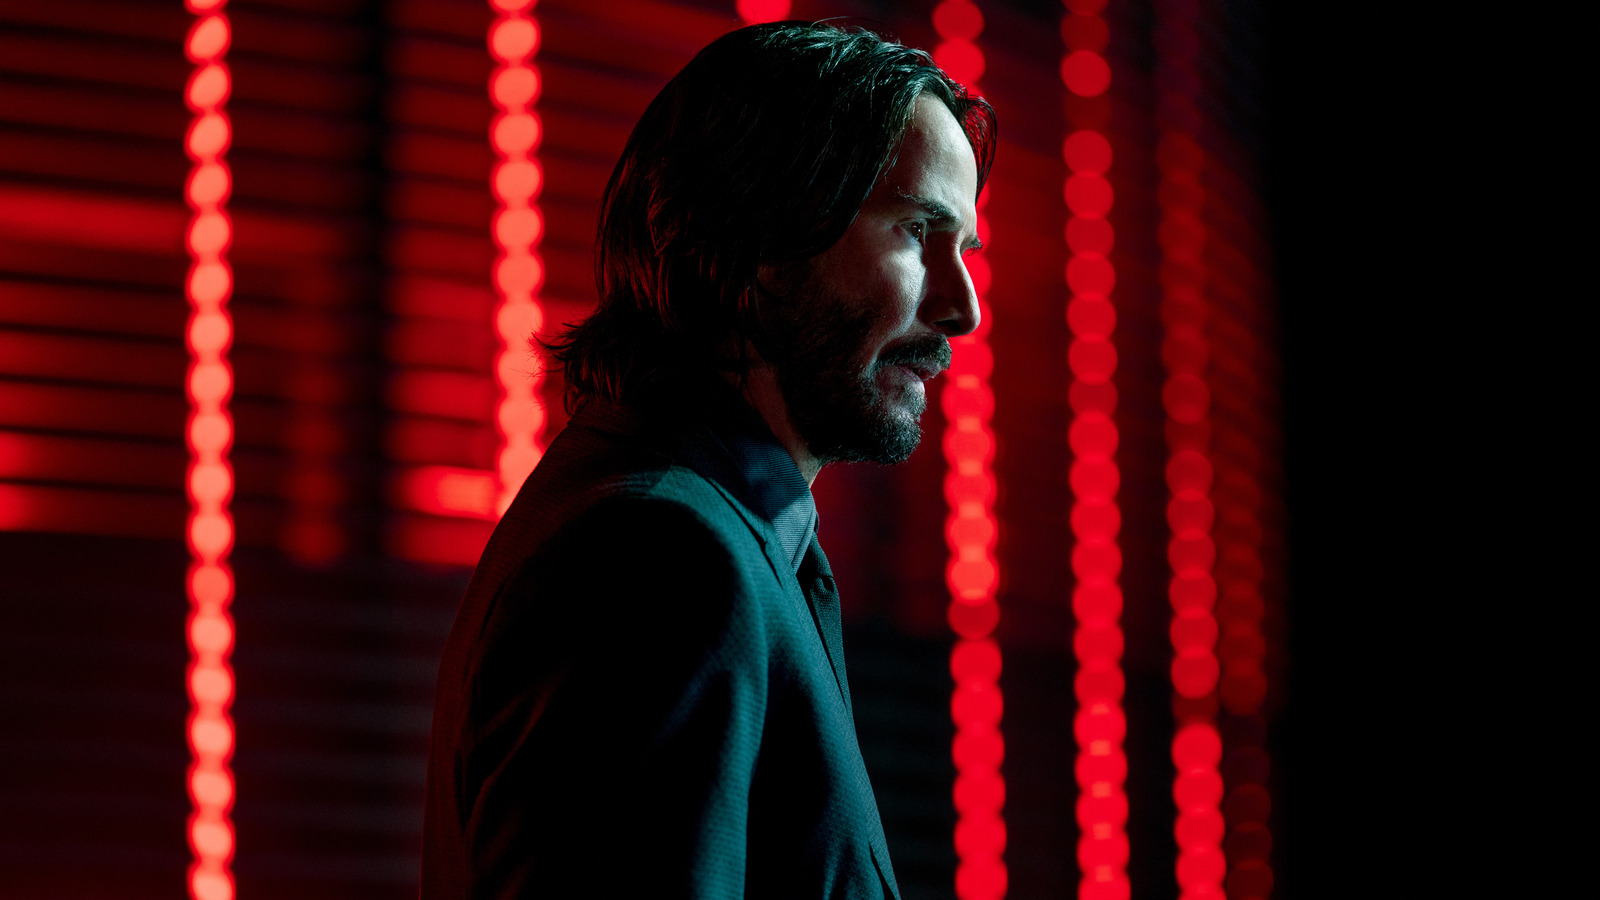 John Wick: Chapter 4' Credits Scene and Ending, Explained